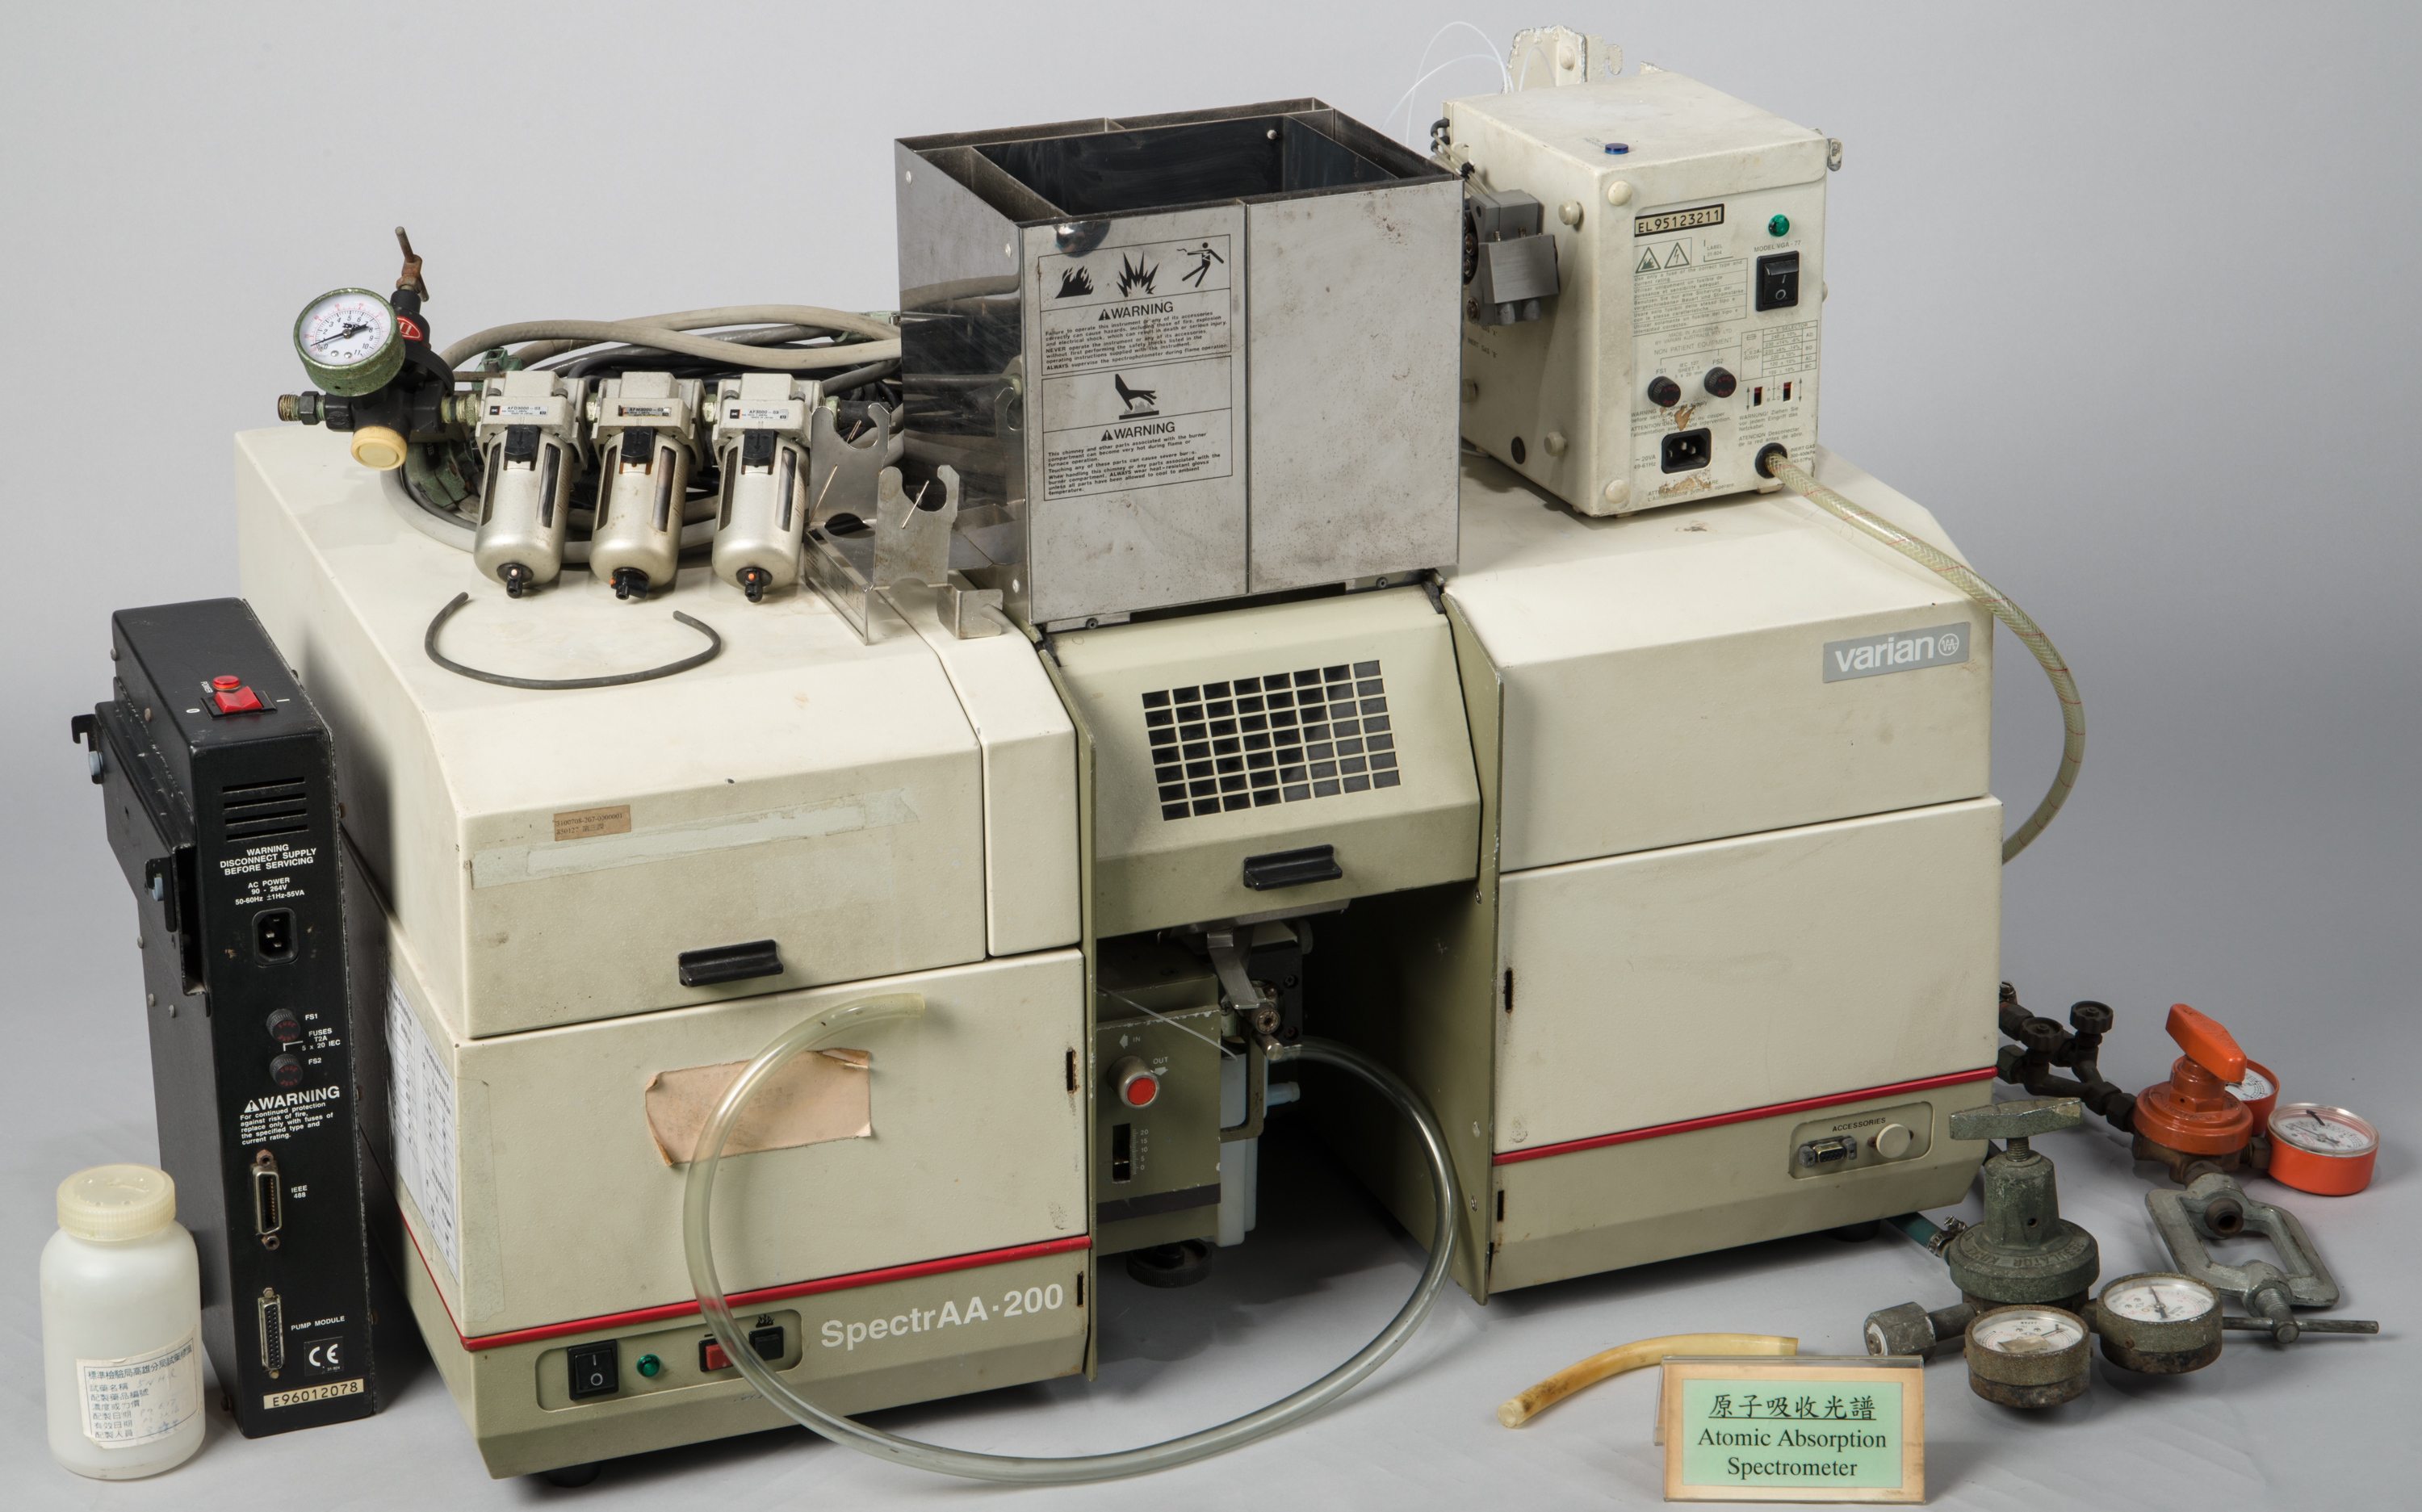 Atomic absorption spectrometer,Total 3 pictures